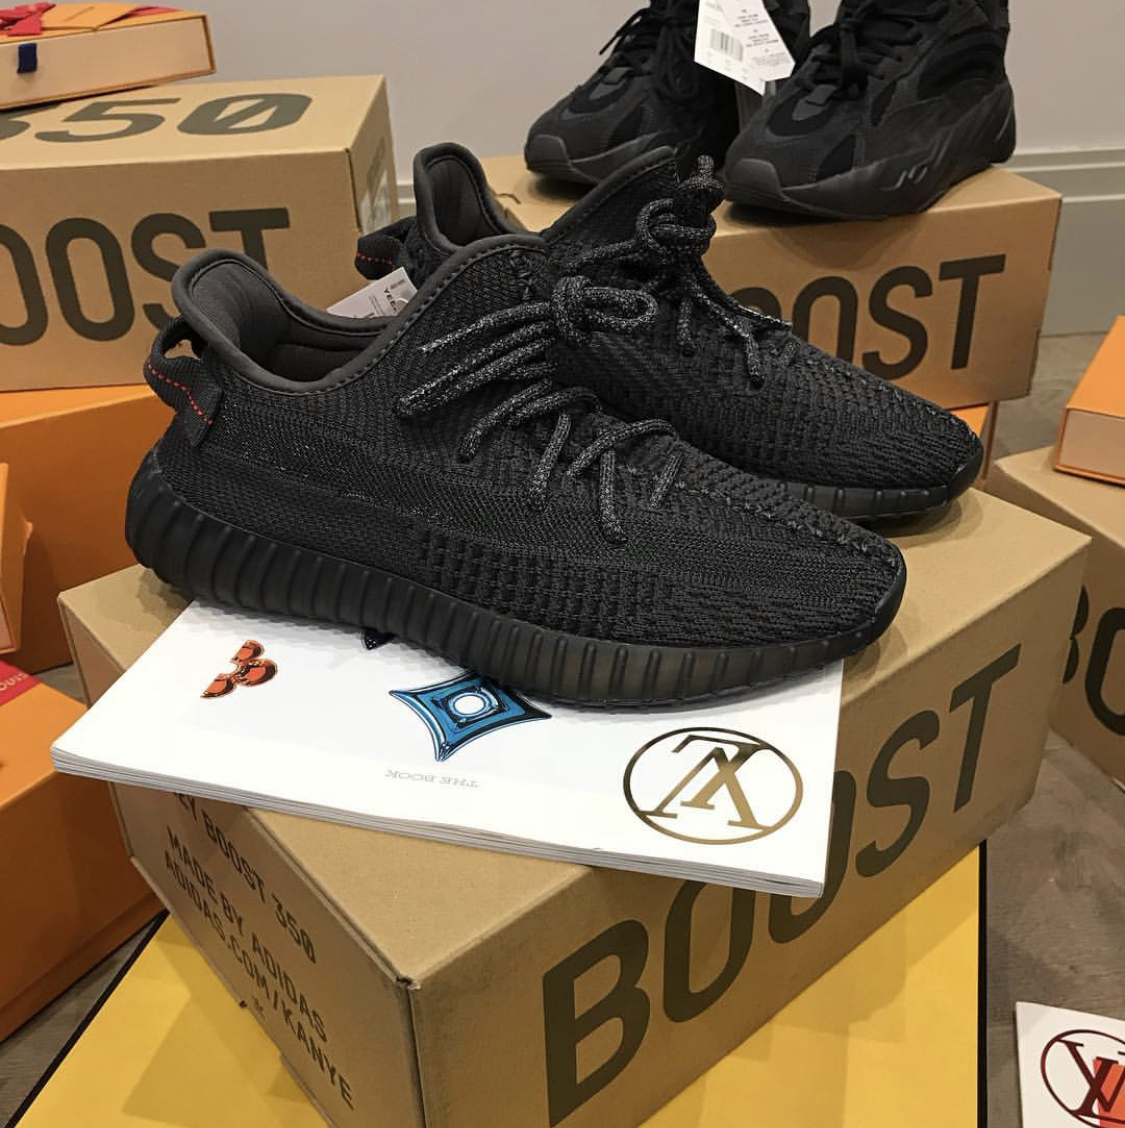 Cheap Adidas Yeezy Boost 350 V2 Carbon Fz5000 Asriel Men’S Size 4 Ds Ships Fast